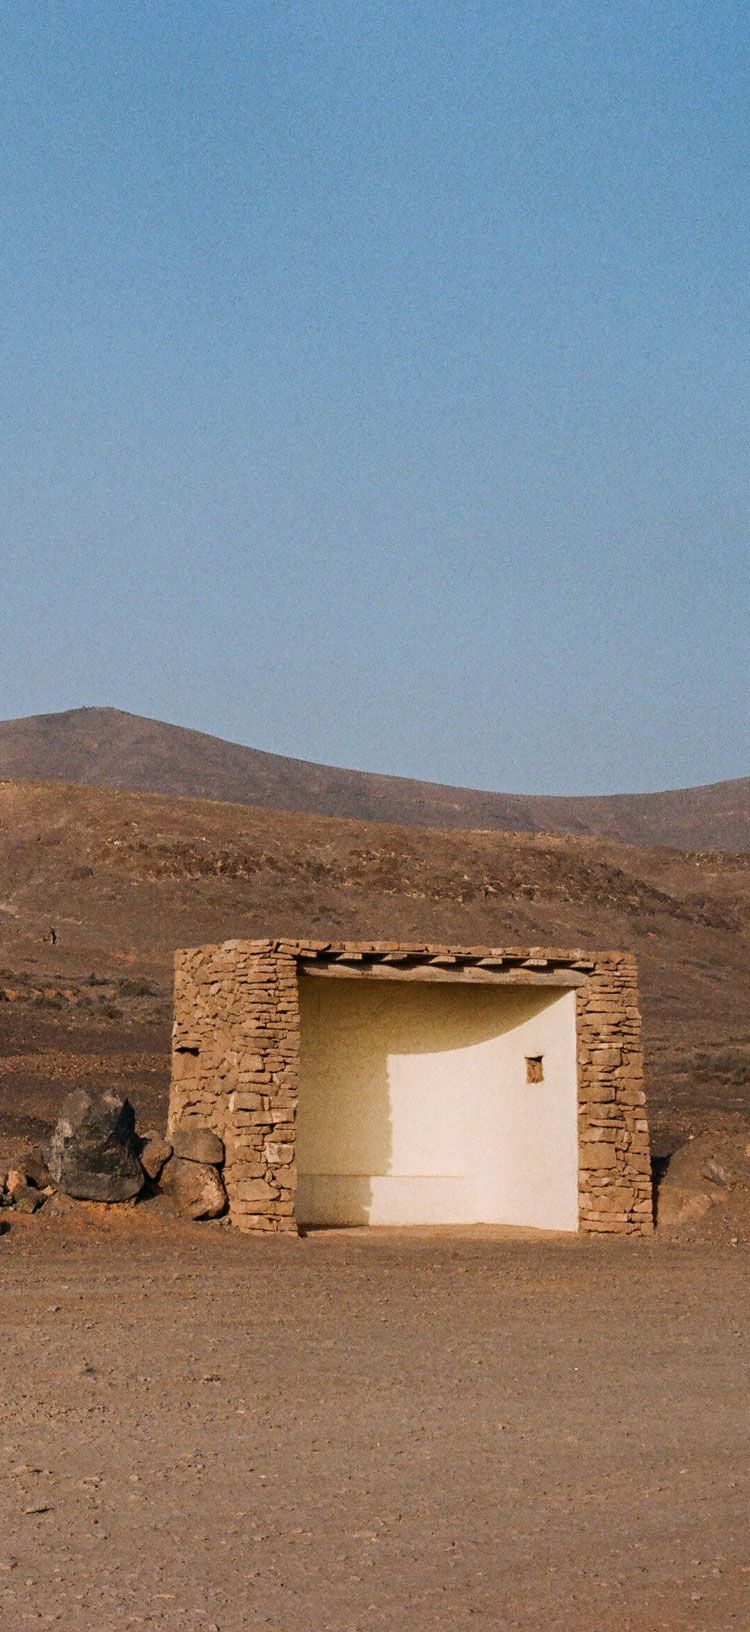 Landscapes as Portraits: Capturing The Island of Lanzarote